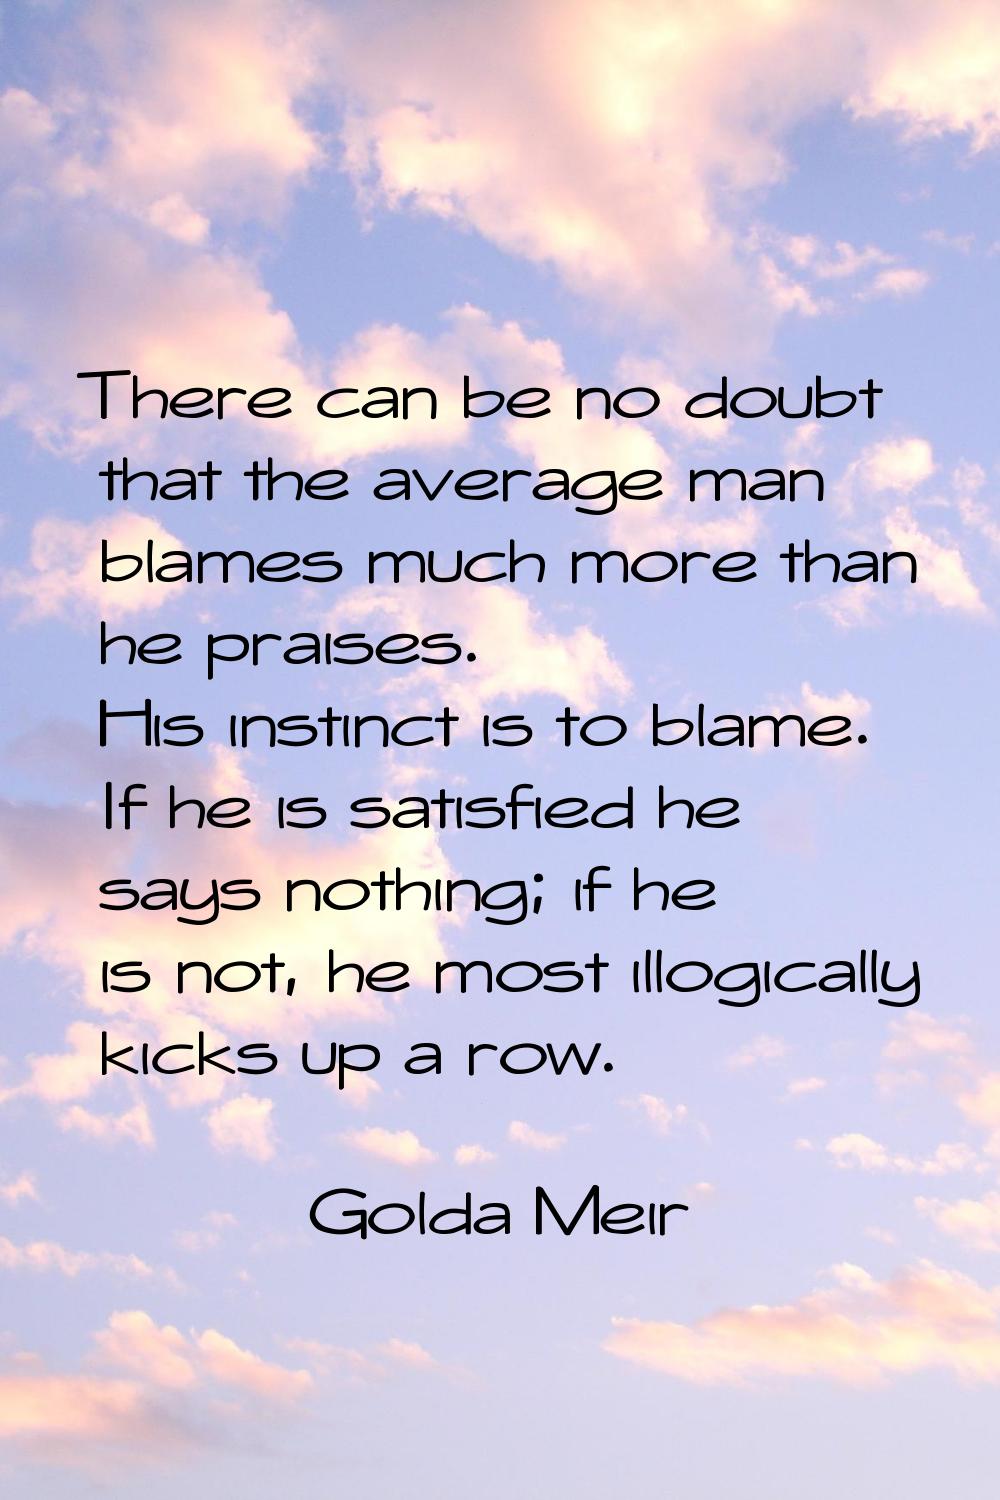 There can be no doubt that the average man blames much more than he praises. His instinct is to bla